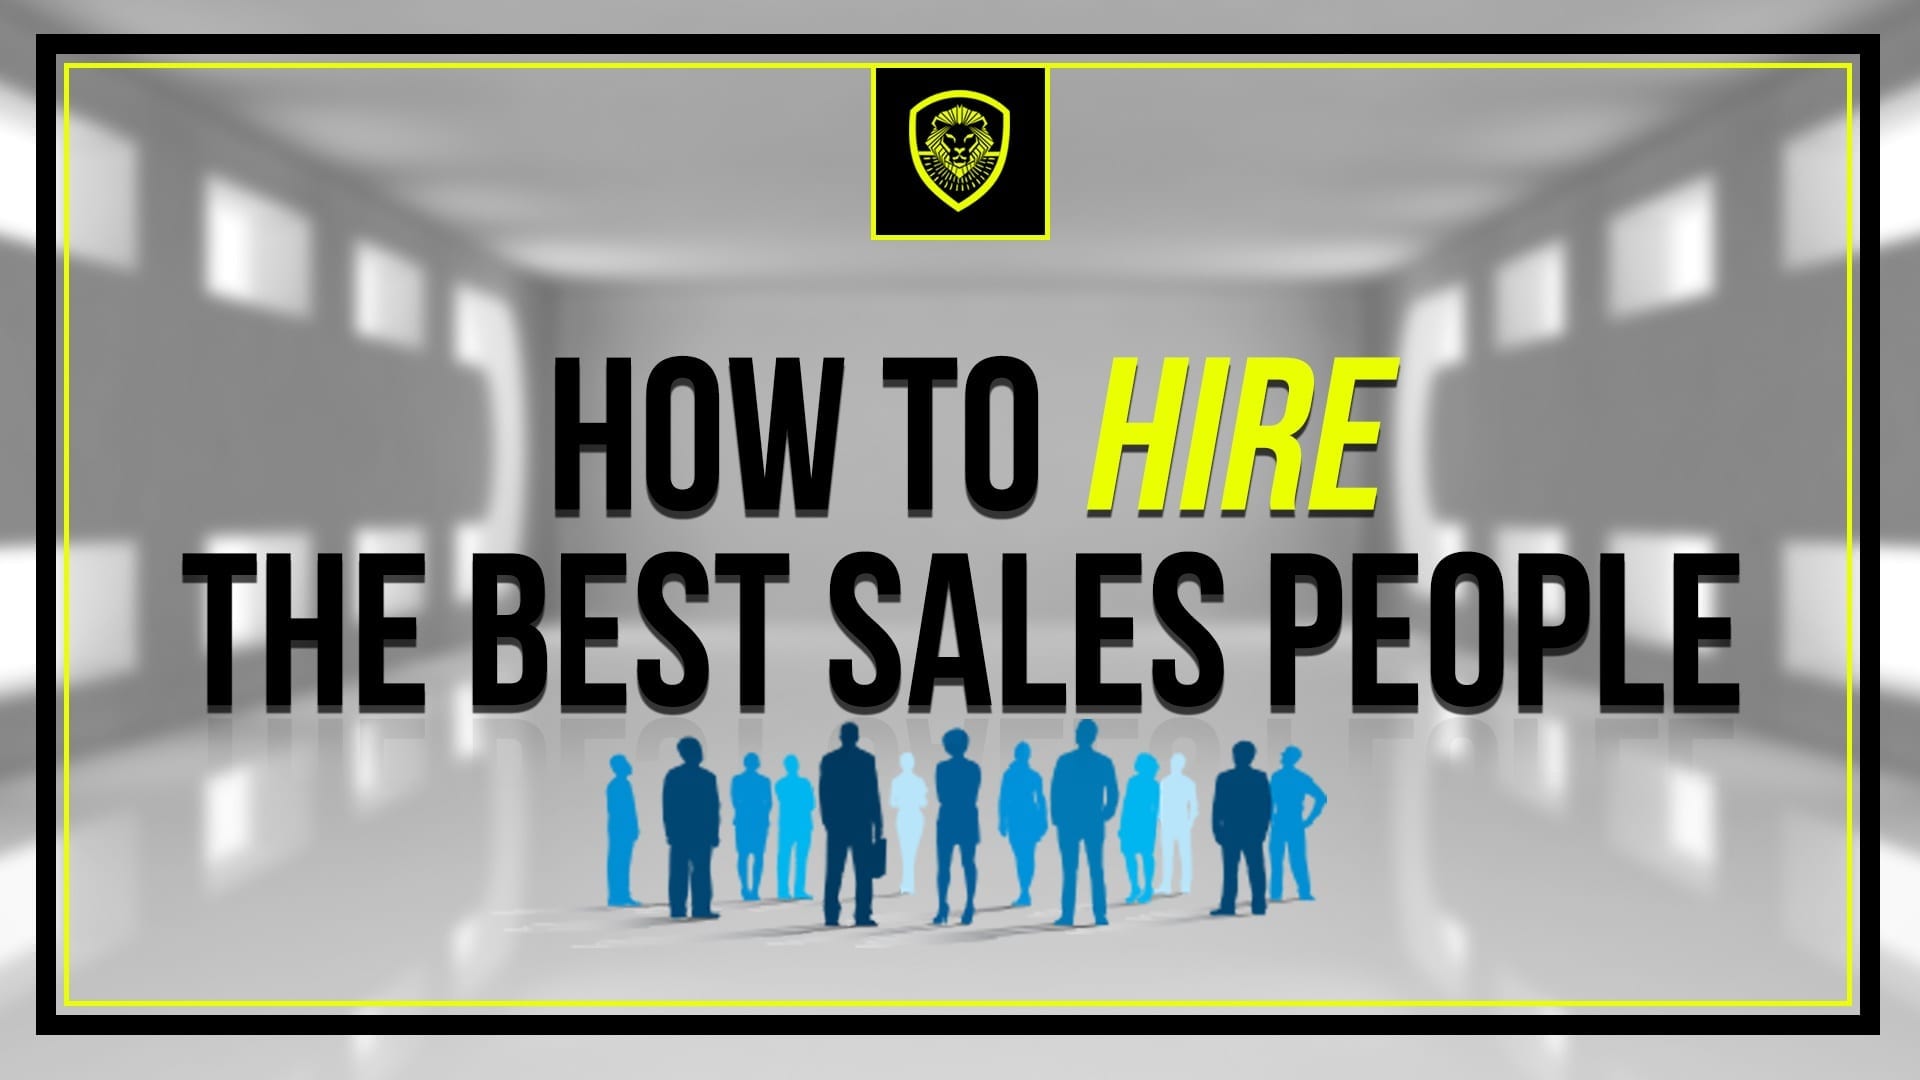 When you look to hire the best salespeople, do you look for ones that can sell the proverbial ice to an Eskimo? Here's what to look for instead.